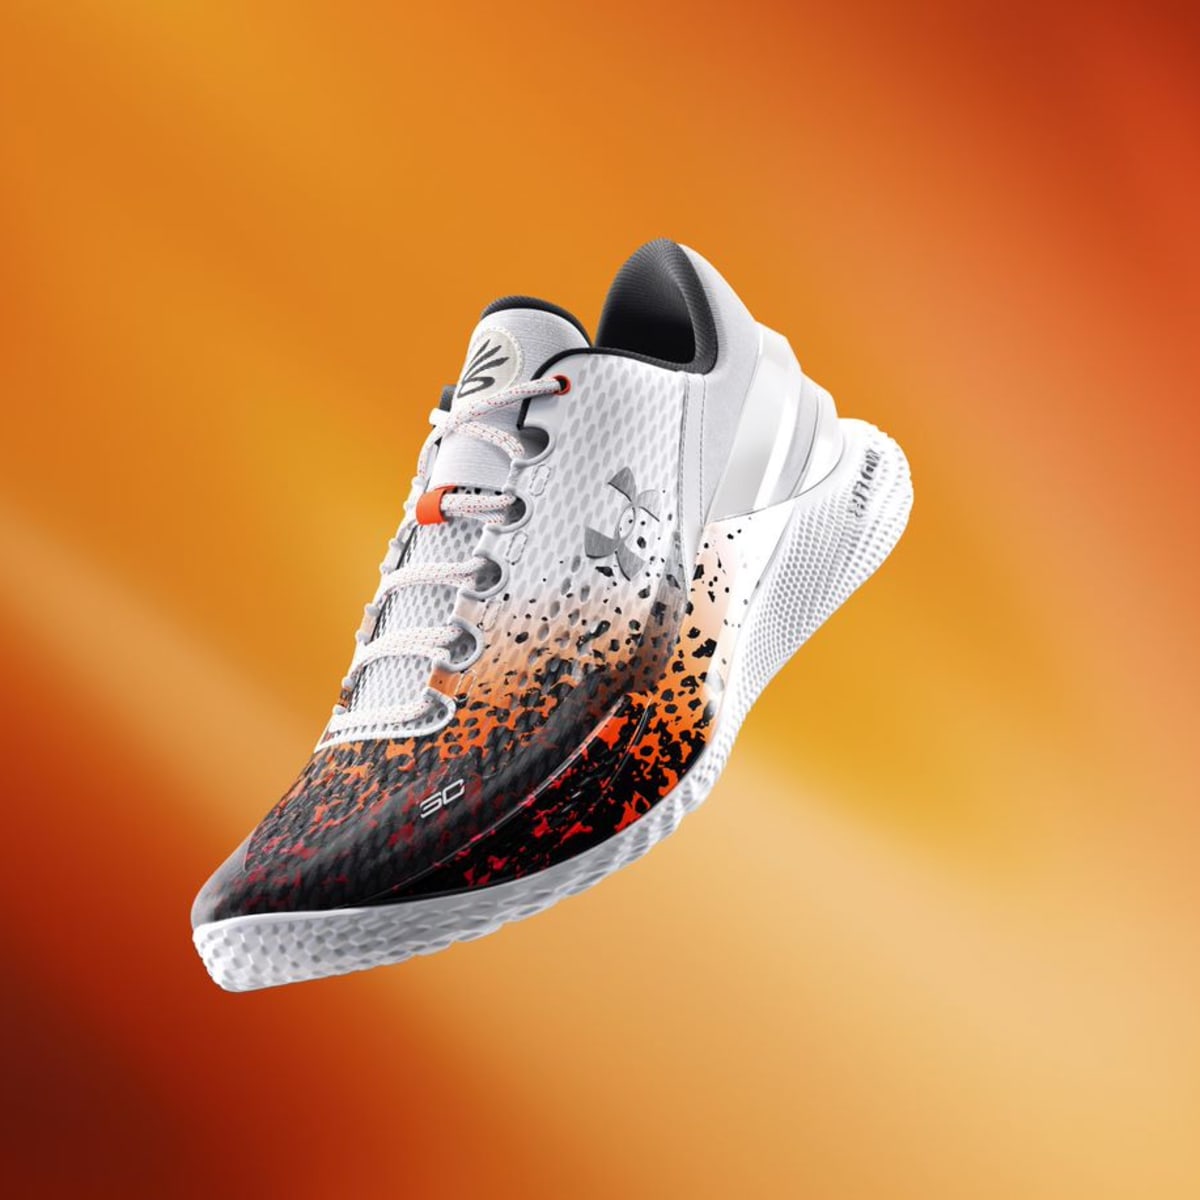 Leuren Zending Stroomopwaarts Curry 2 Low FloTro 'Chef Curry' Release Information - Sports Illustrated  FanNation Kicks News, Analysis and More